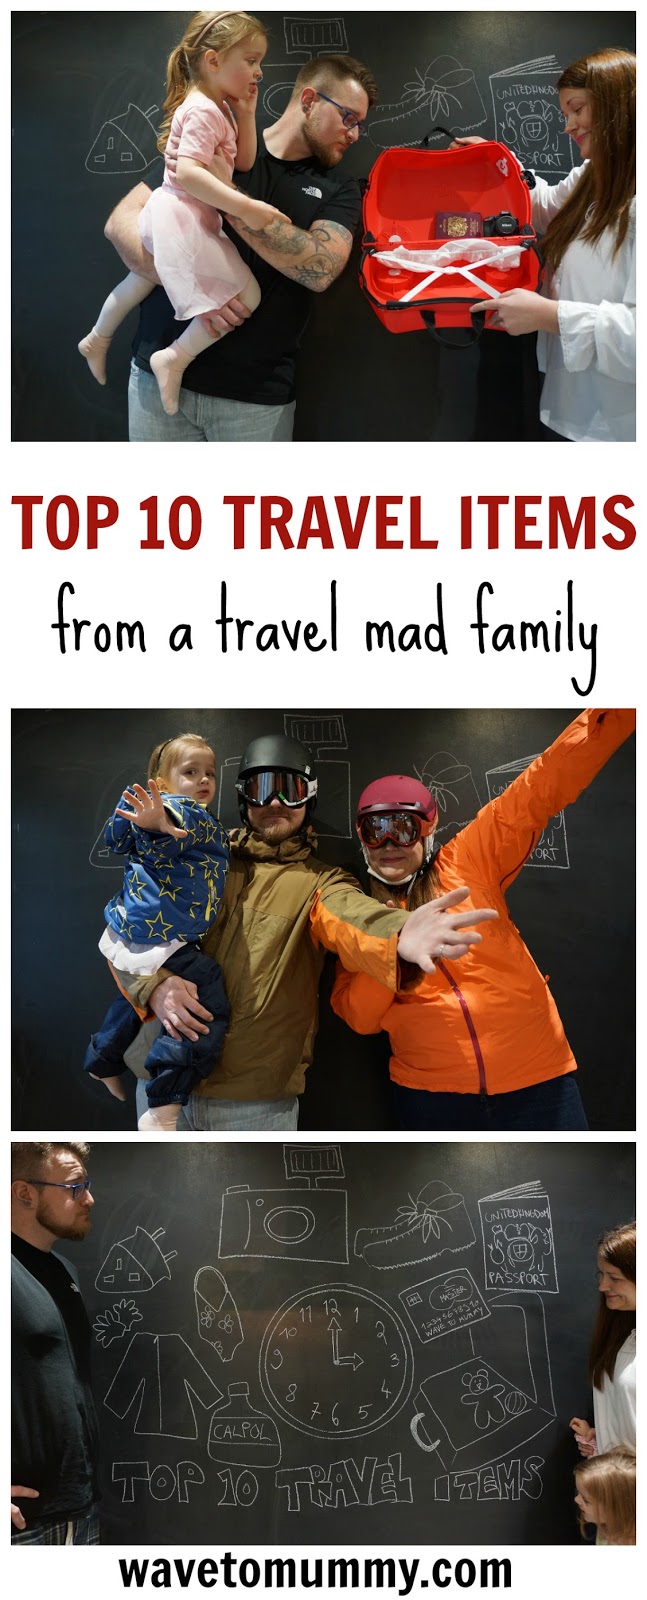 The top travel items every family should remember to pack - and why. A light-hearted take on things to remember to include when packing for family travel.